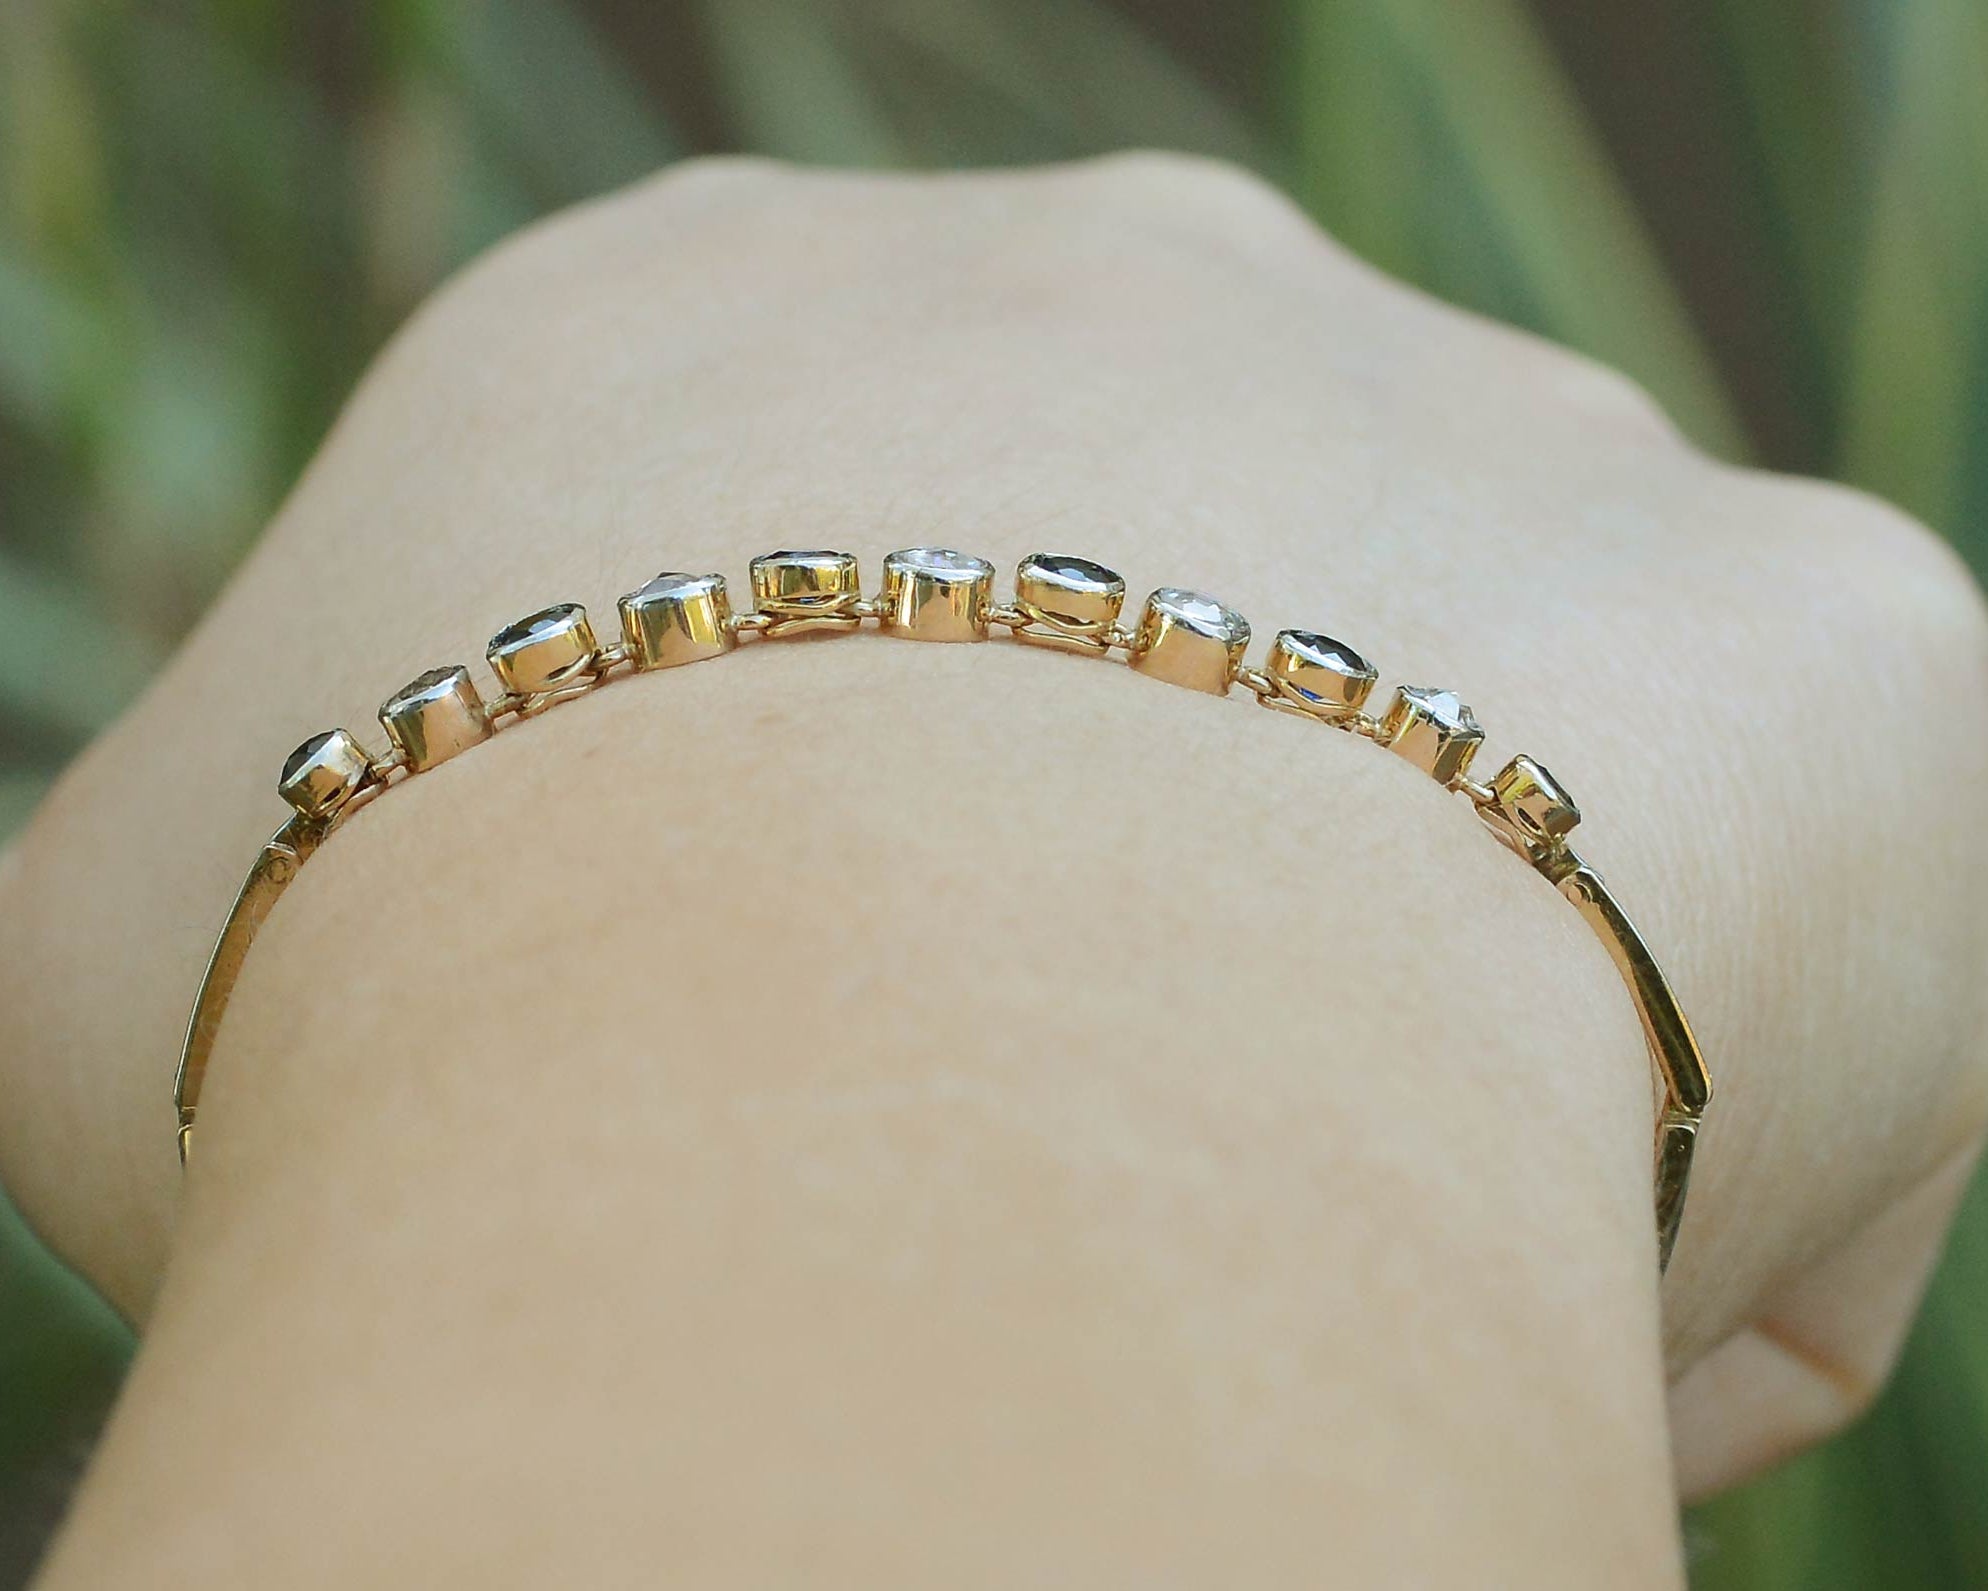 Distinguishable, alternating gems, each set in their own collet in this line bracelet.